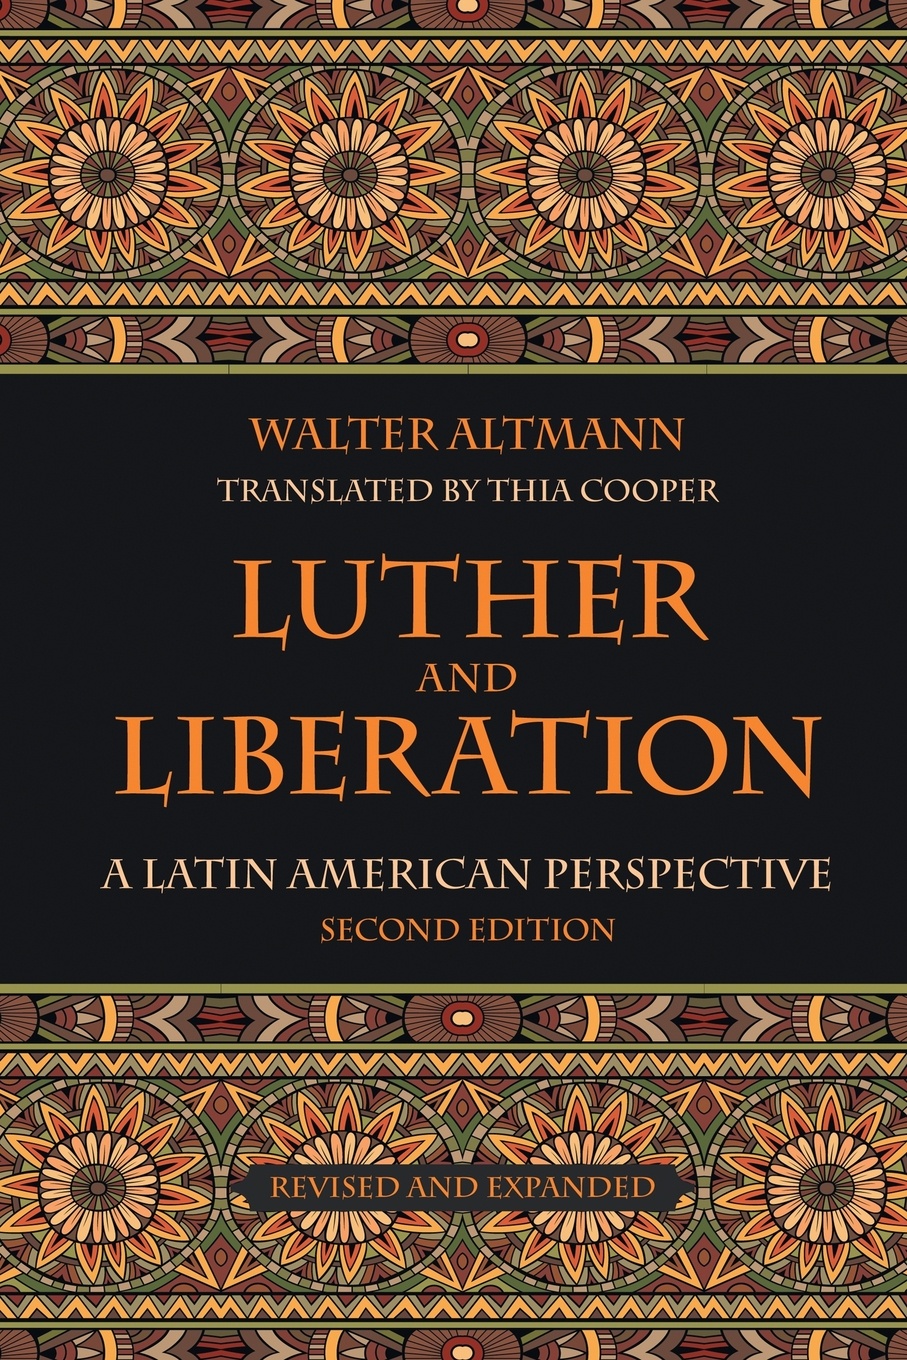 Luther and Liberation. A Latin American Perspective, Second Edition